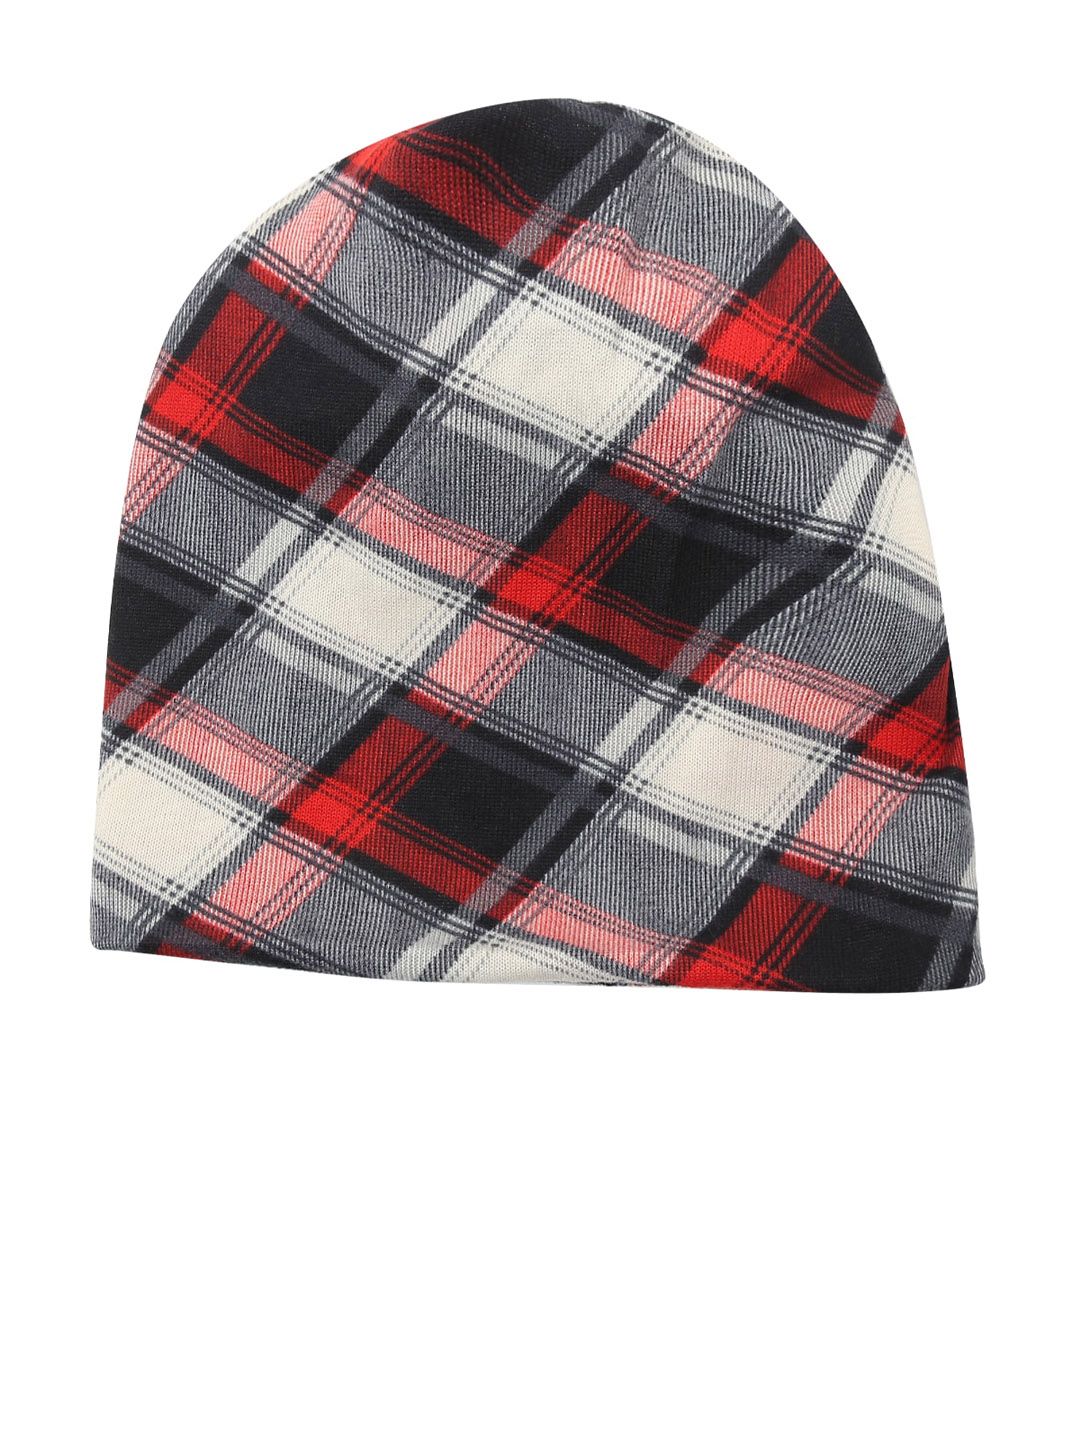 iSWEVEN Unisex White & Black Printed Beanie Price in India